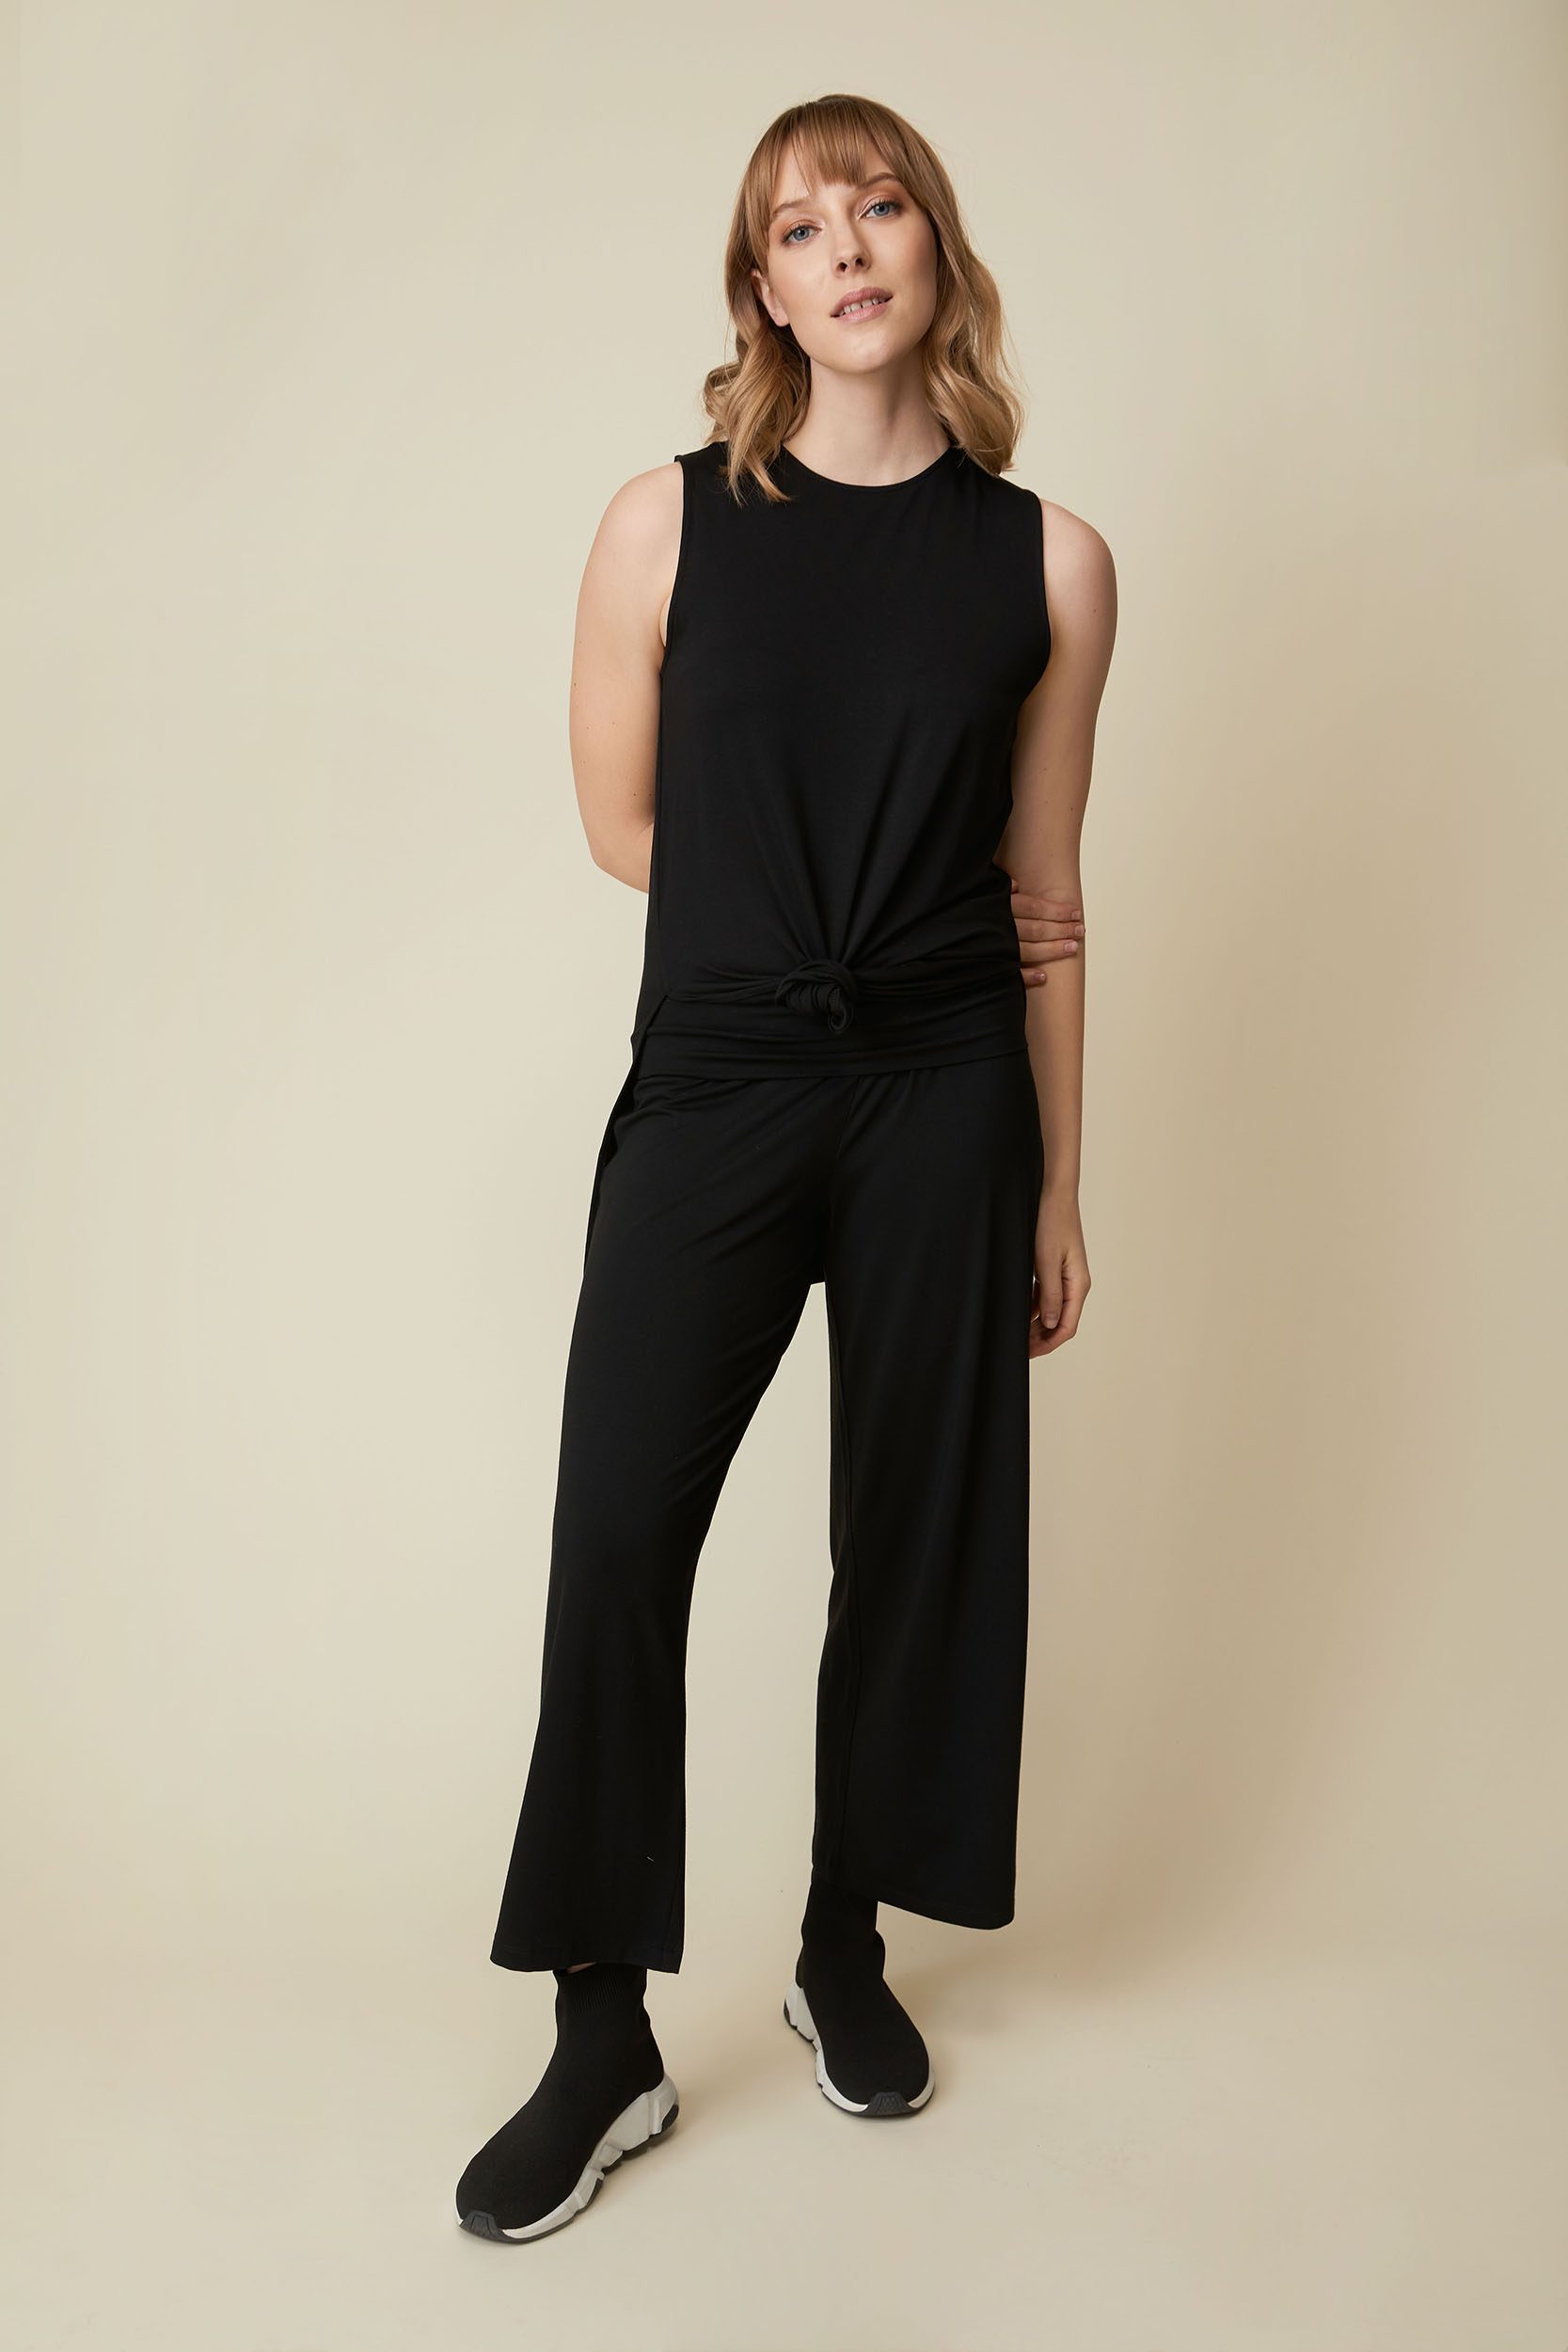 Sleeveless Top With Side Slits